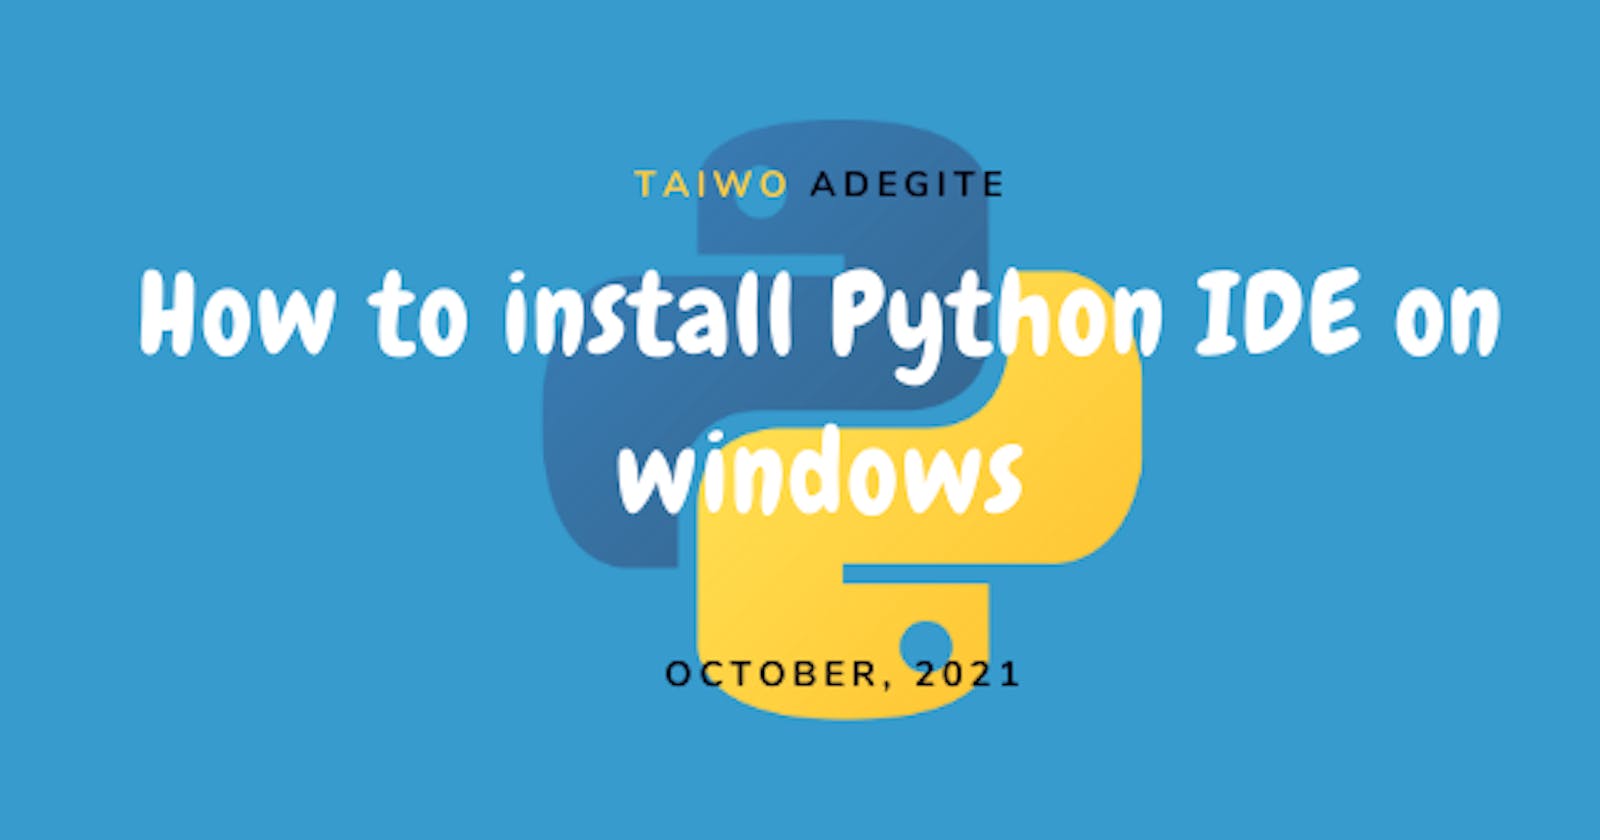 How to install Python IDE (Integrated Development Environment) on Windows